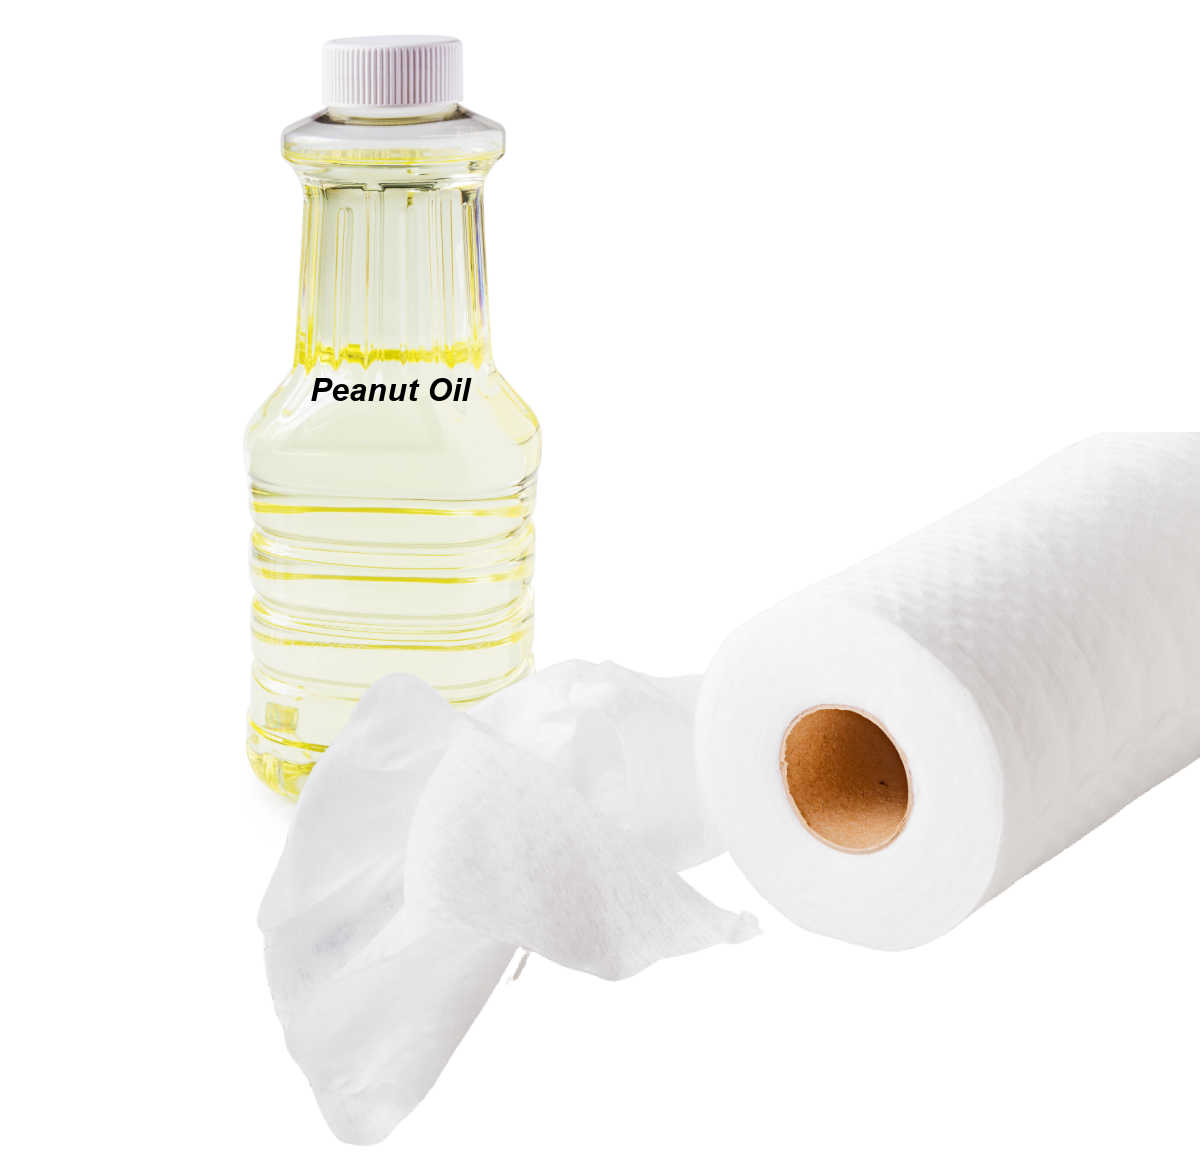 Bottle of peanut oil and roll of paper towels.